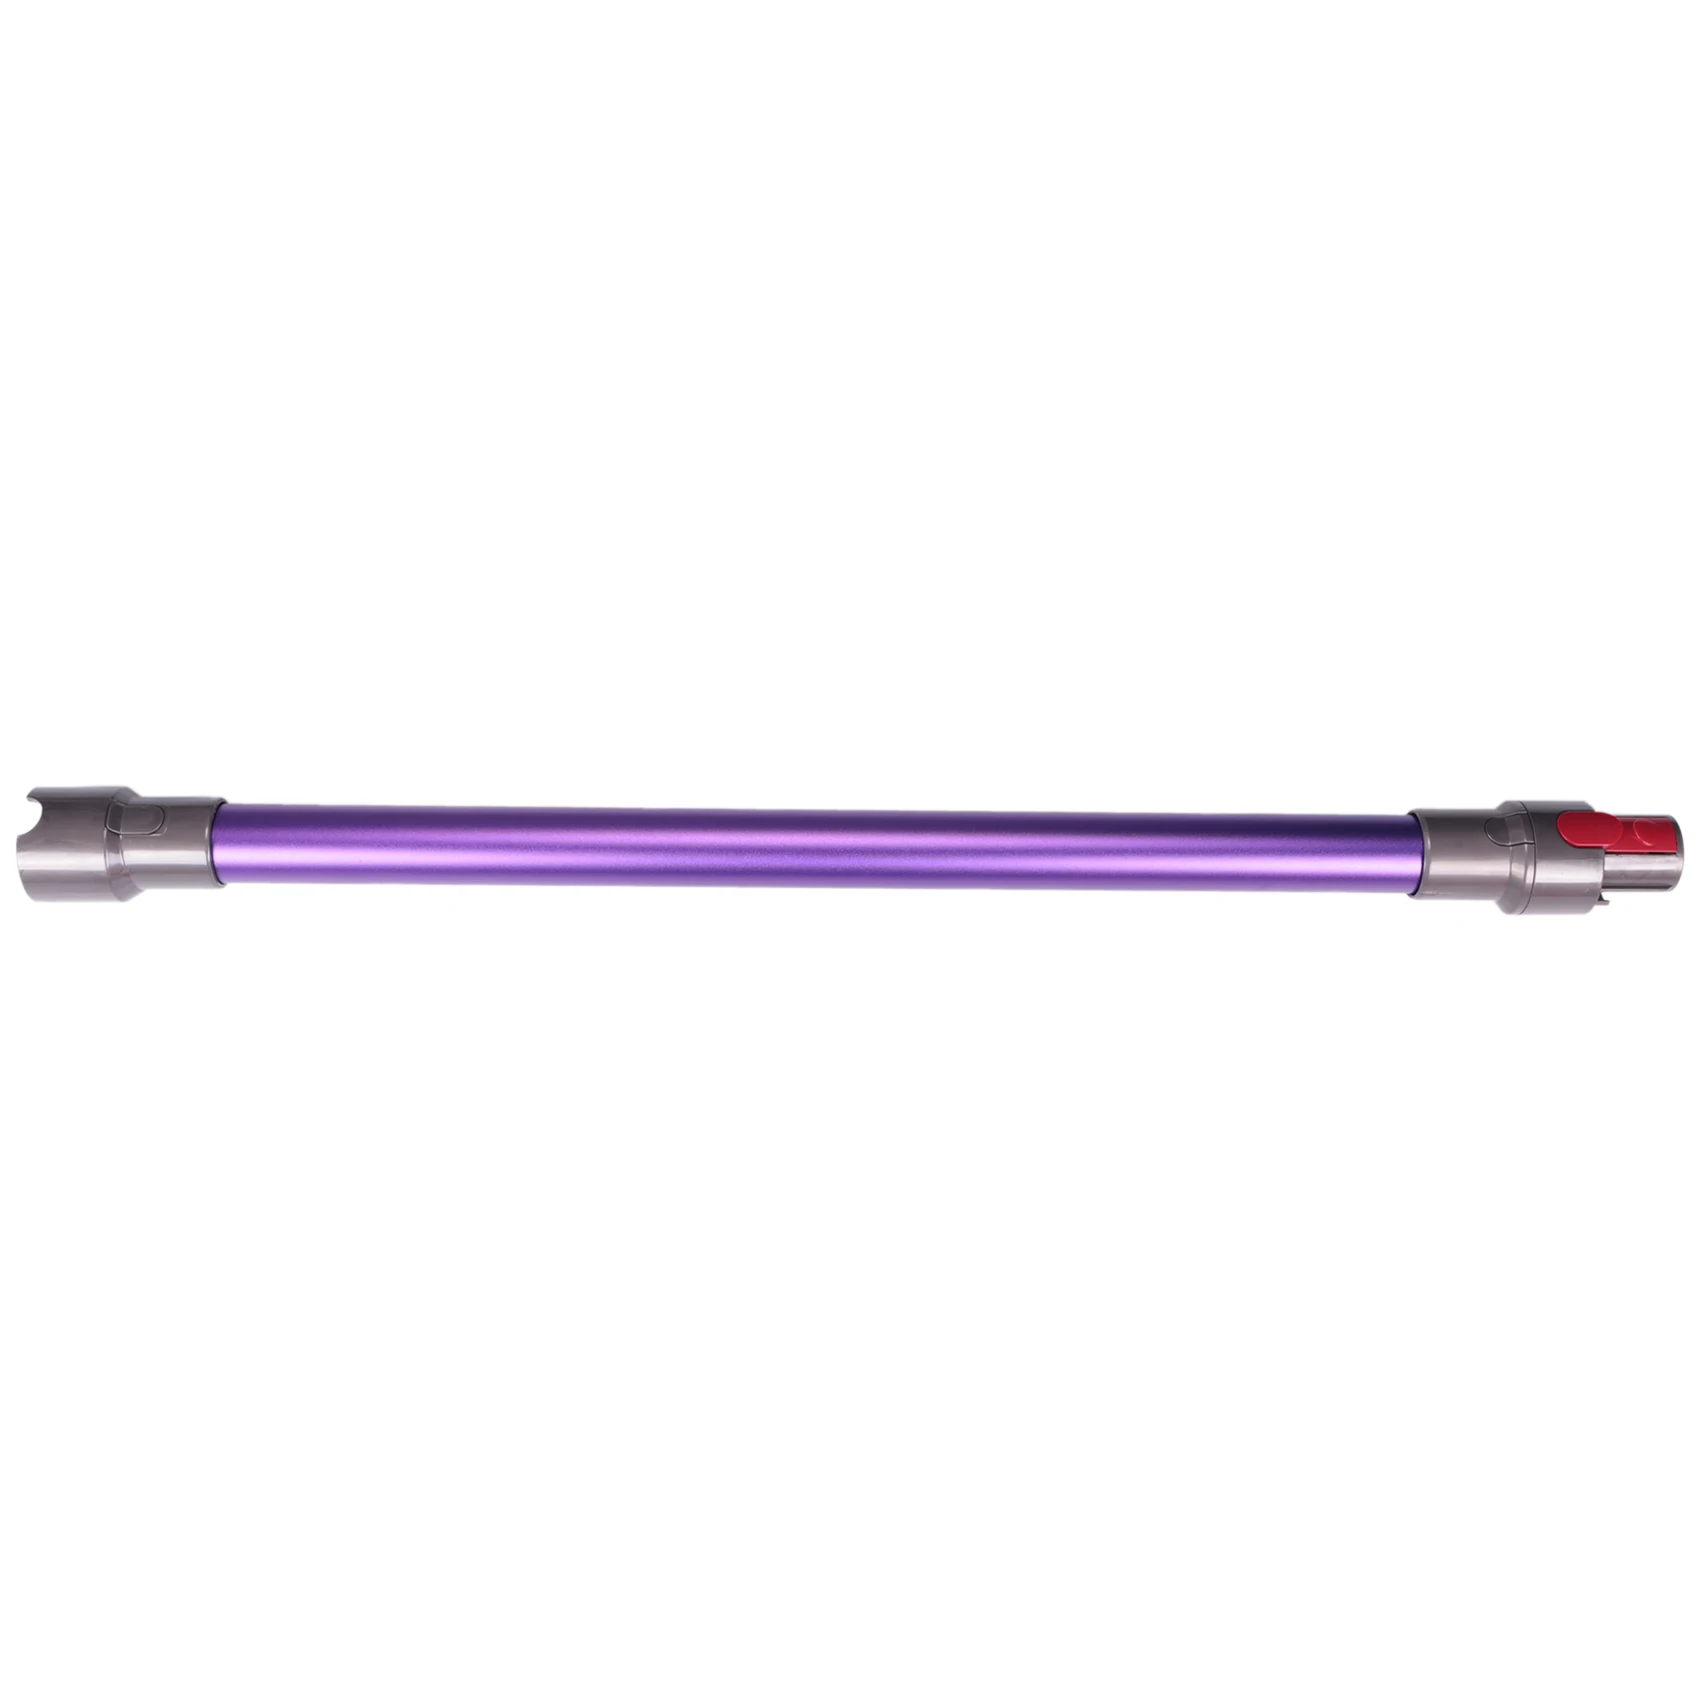 Quick Release Extension Wand Tube for Dyson V7 V8 V10 V11 Handheld Vacuum Cleaner Replacement Parts Purple